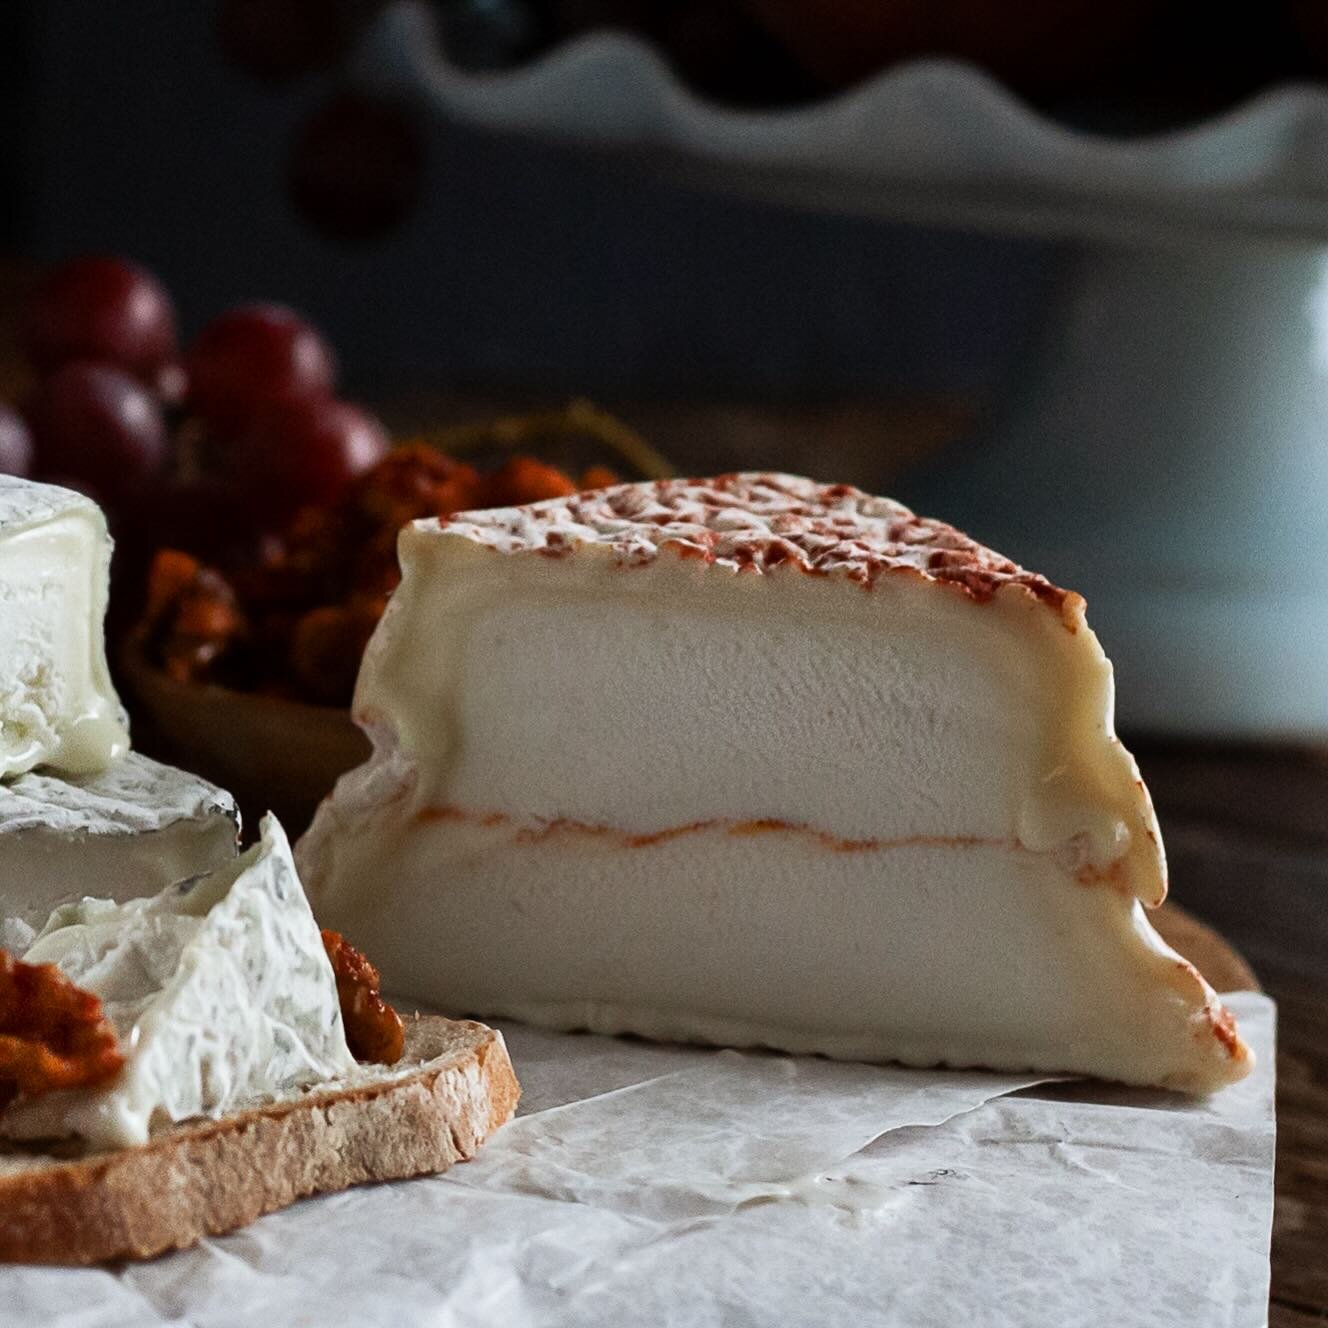 Piper&rsquo;s Pyramide - the 8th wonder of the world! We love her punch of paprika and layer upon layer of delicate flavor.

#piperspyramide #capriolegoatcheese #capriole #goatcheese #smokedpaprika